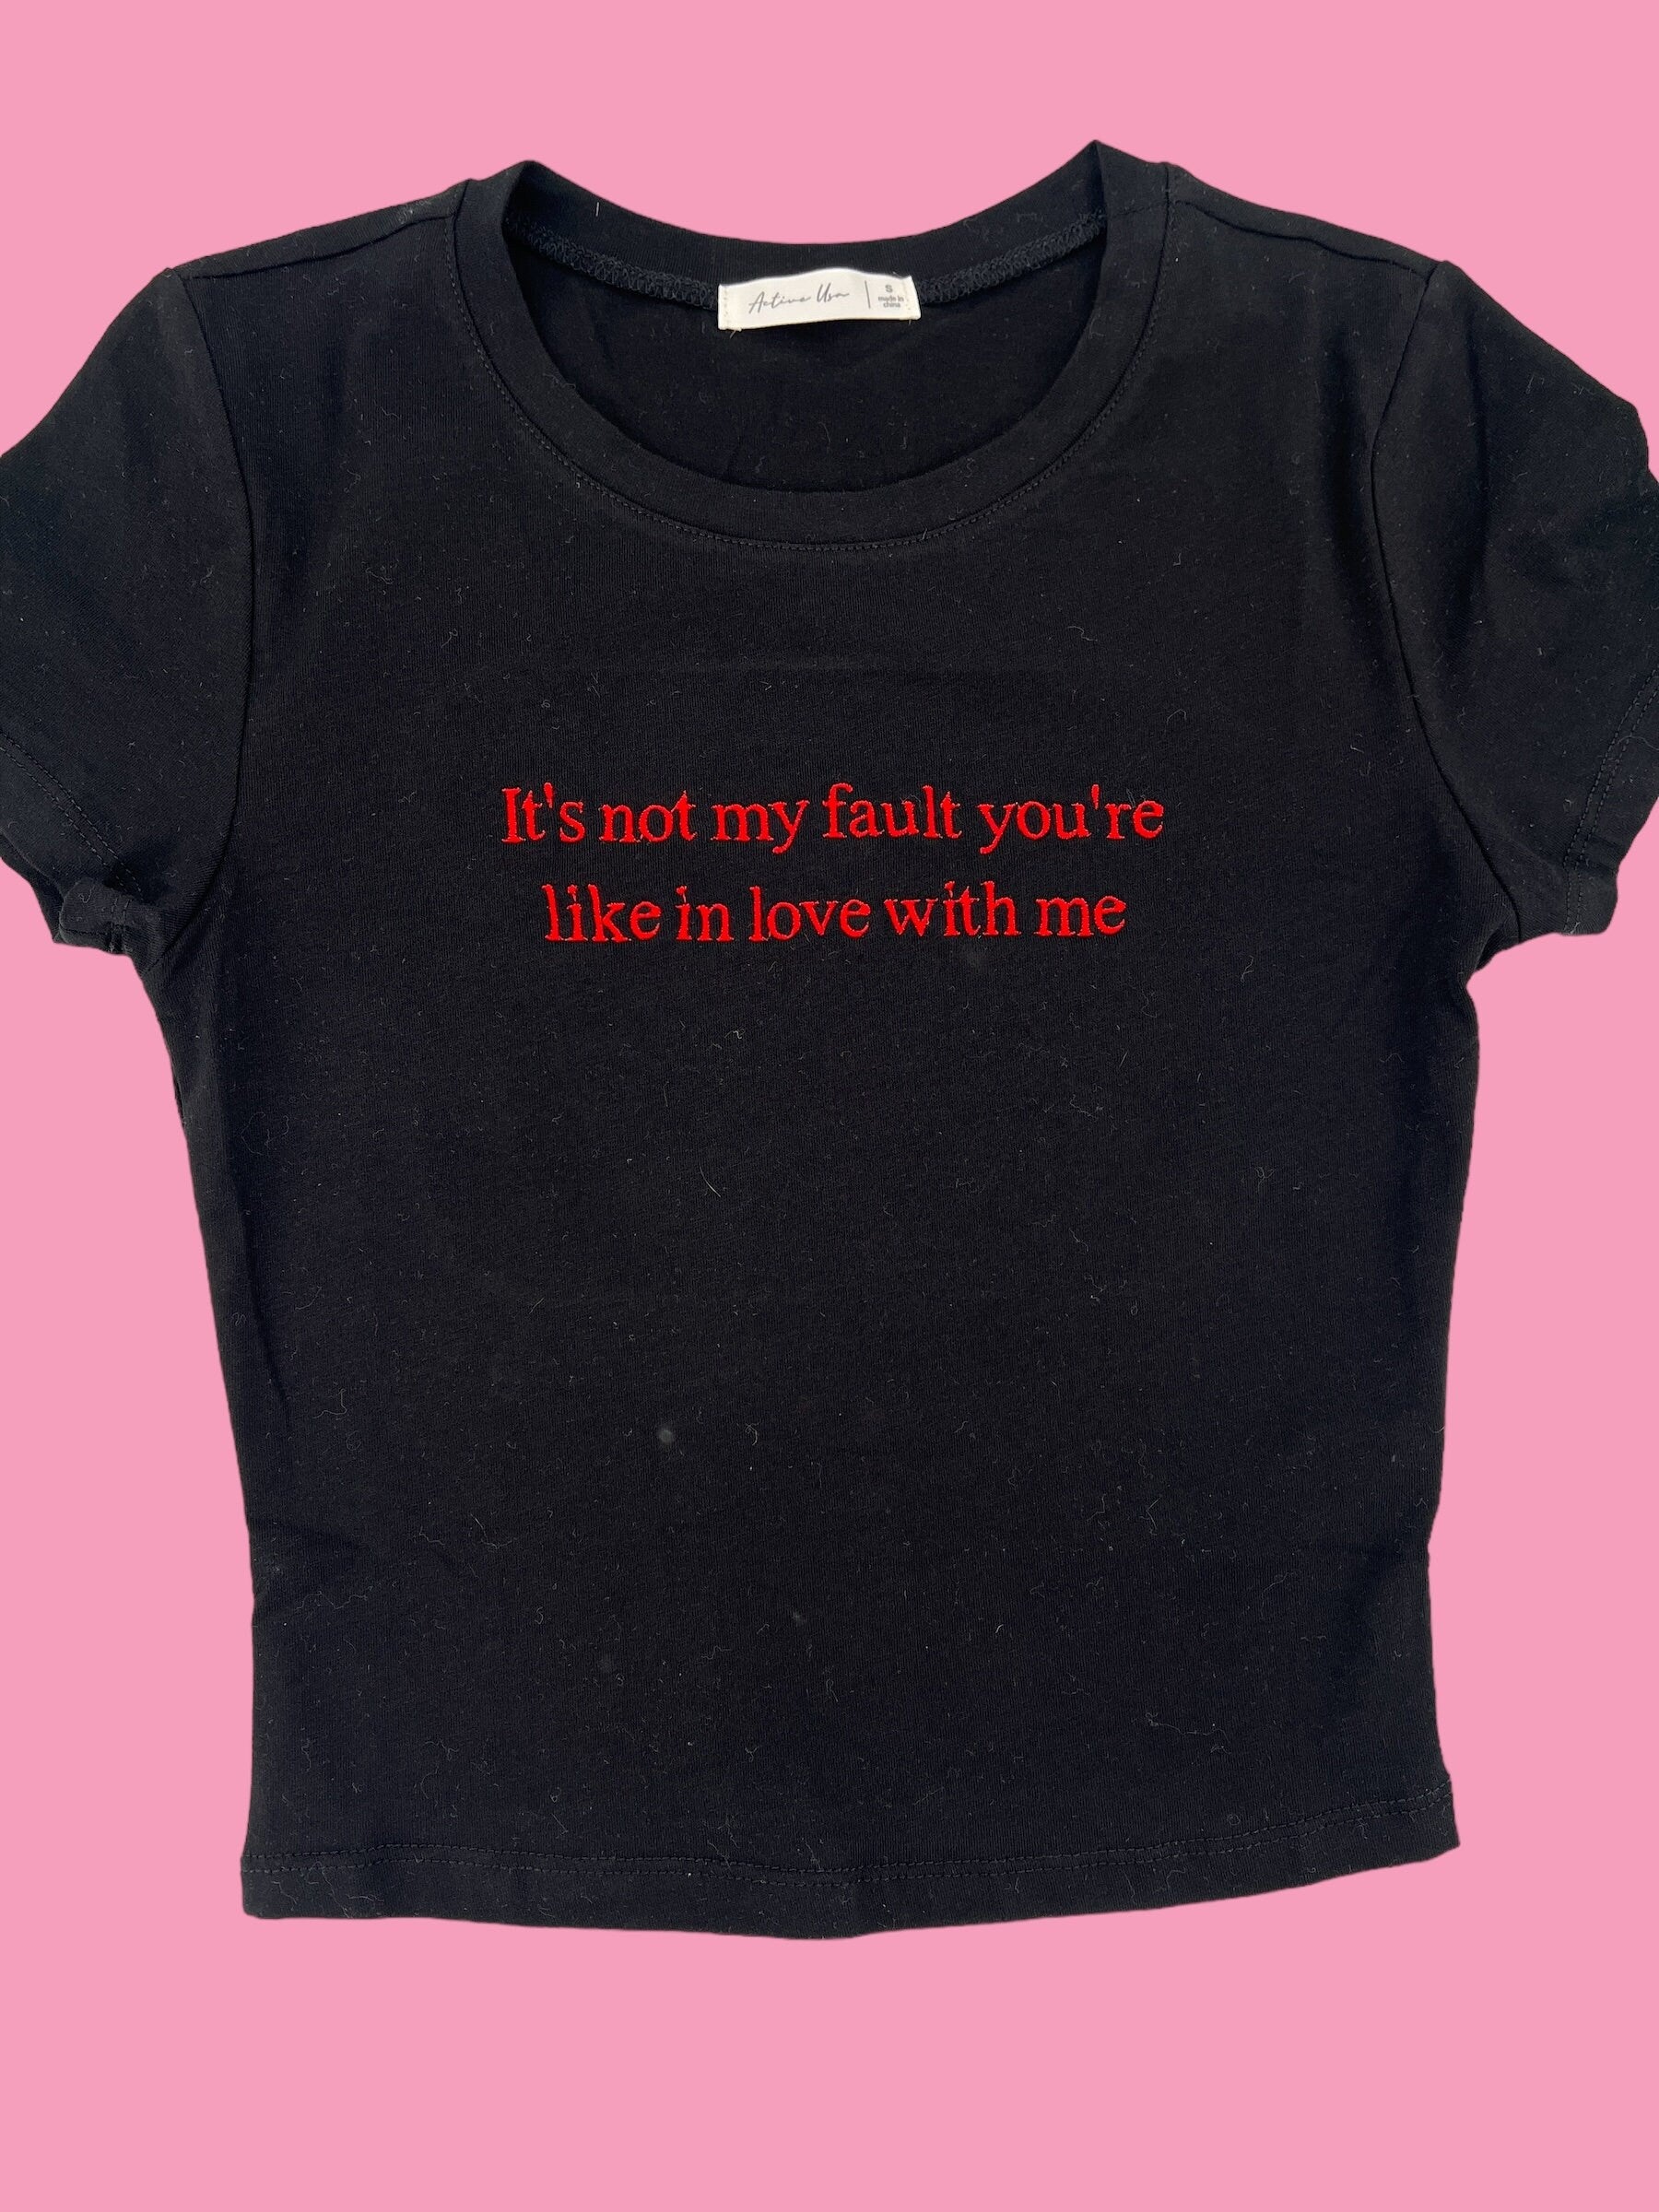 a t - shirt that says it&#39;s not my fault you&#39;re like